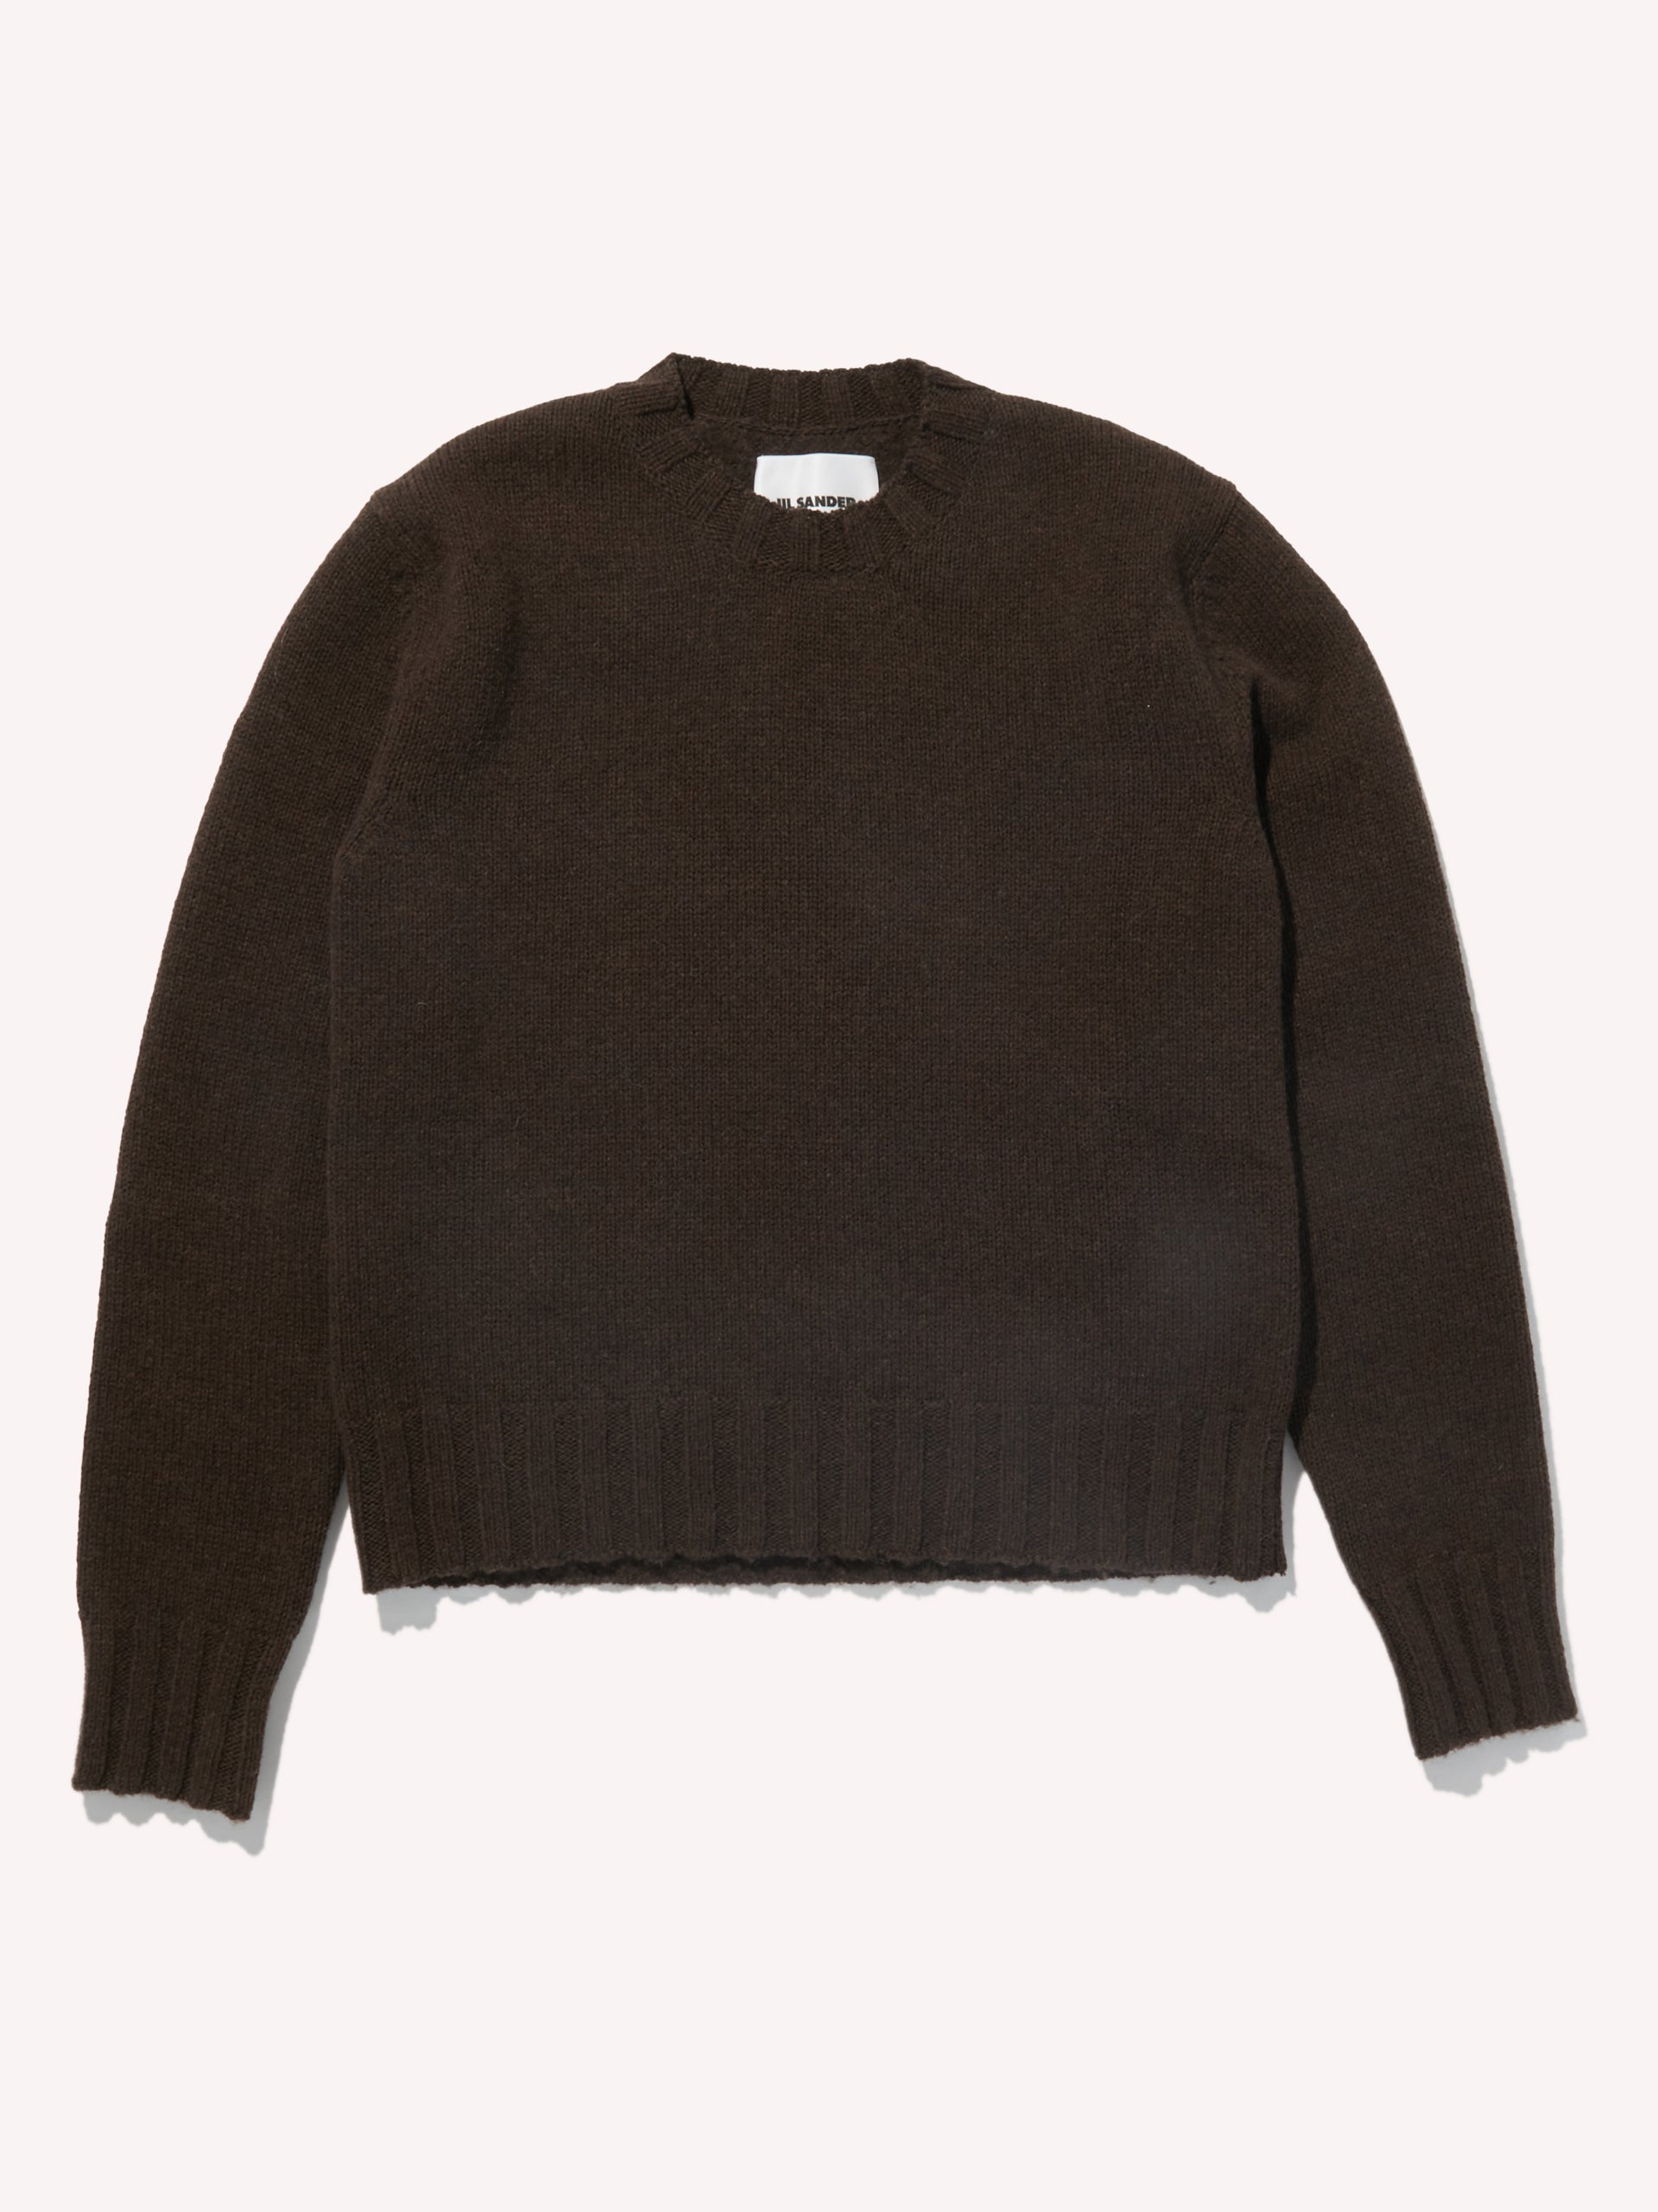 SWEATER CN LS (Cacao)